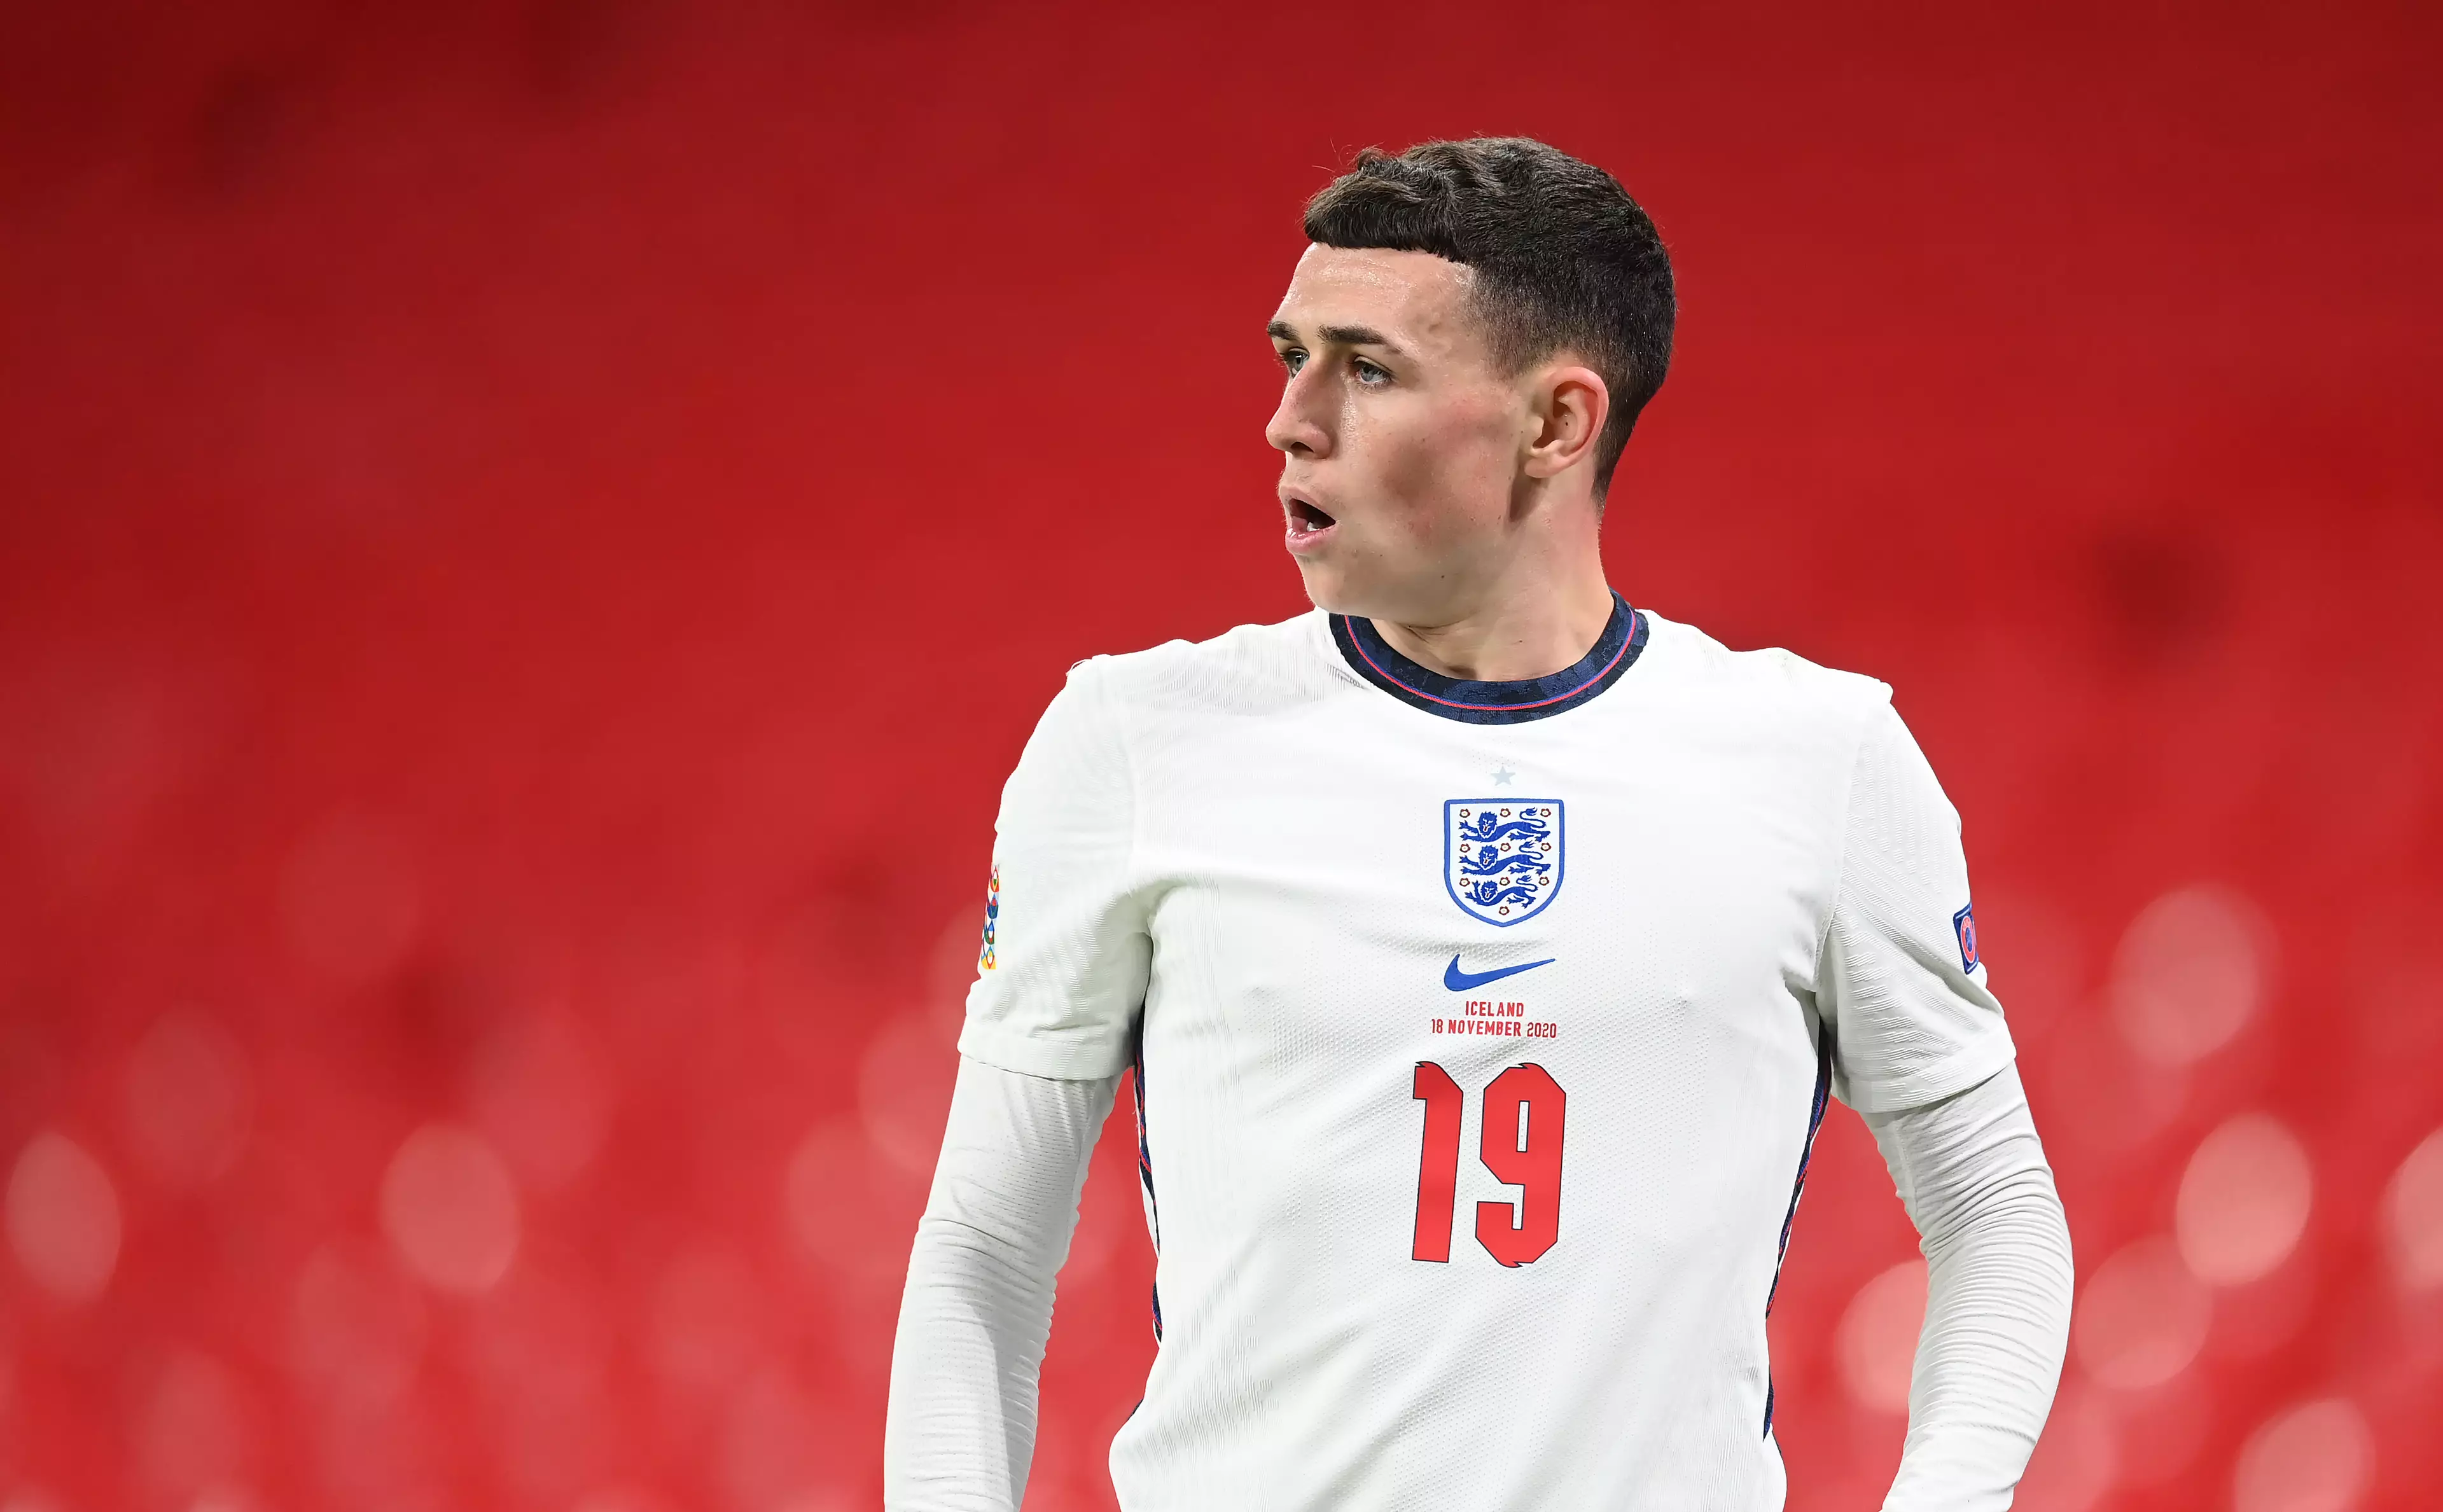 Phil Foden is looking to play a key role at Euro 2020 this summer after a strong domestic campaign